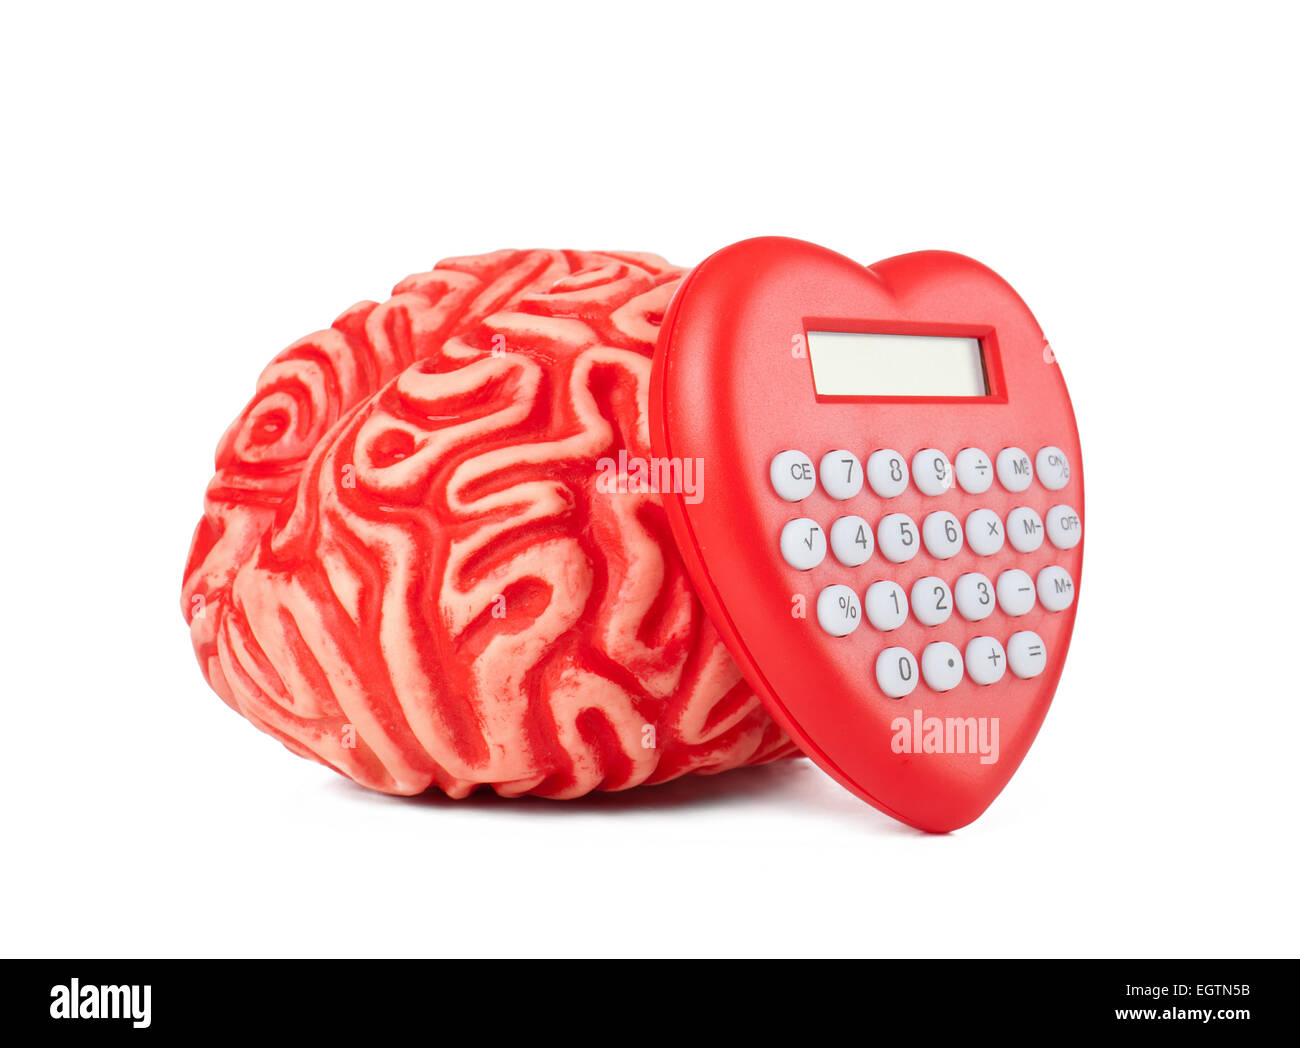 Human rubber brain with calculator heart shaped on white background. Stock Photo